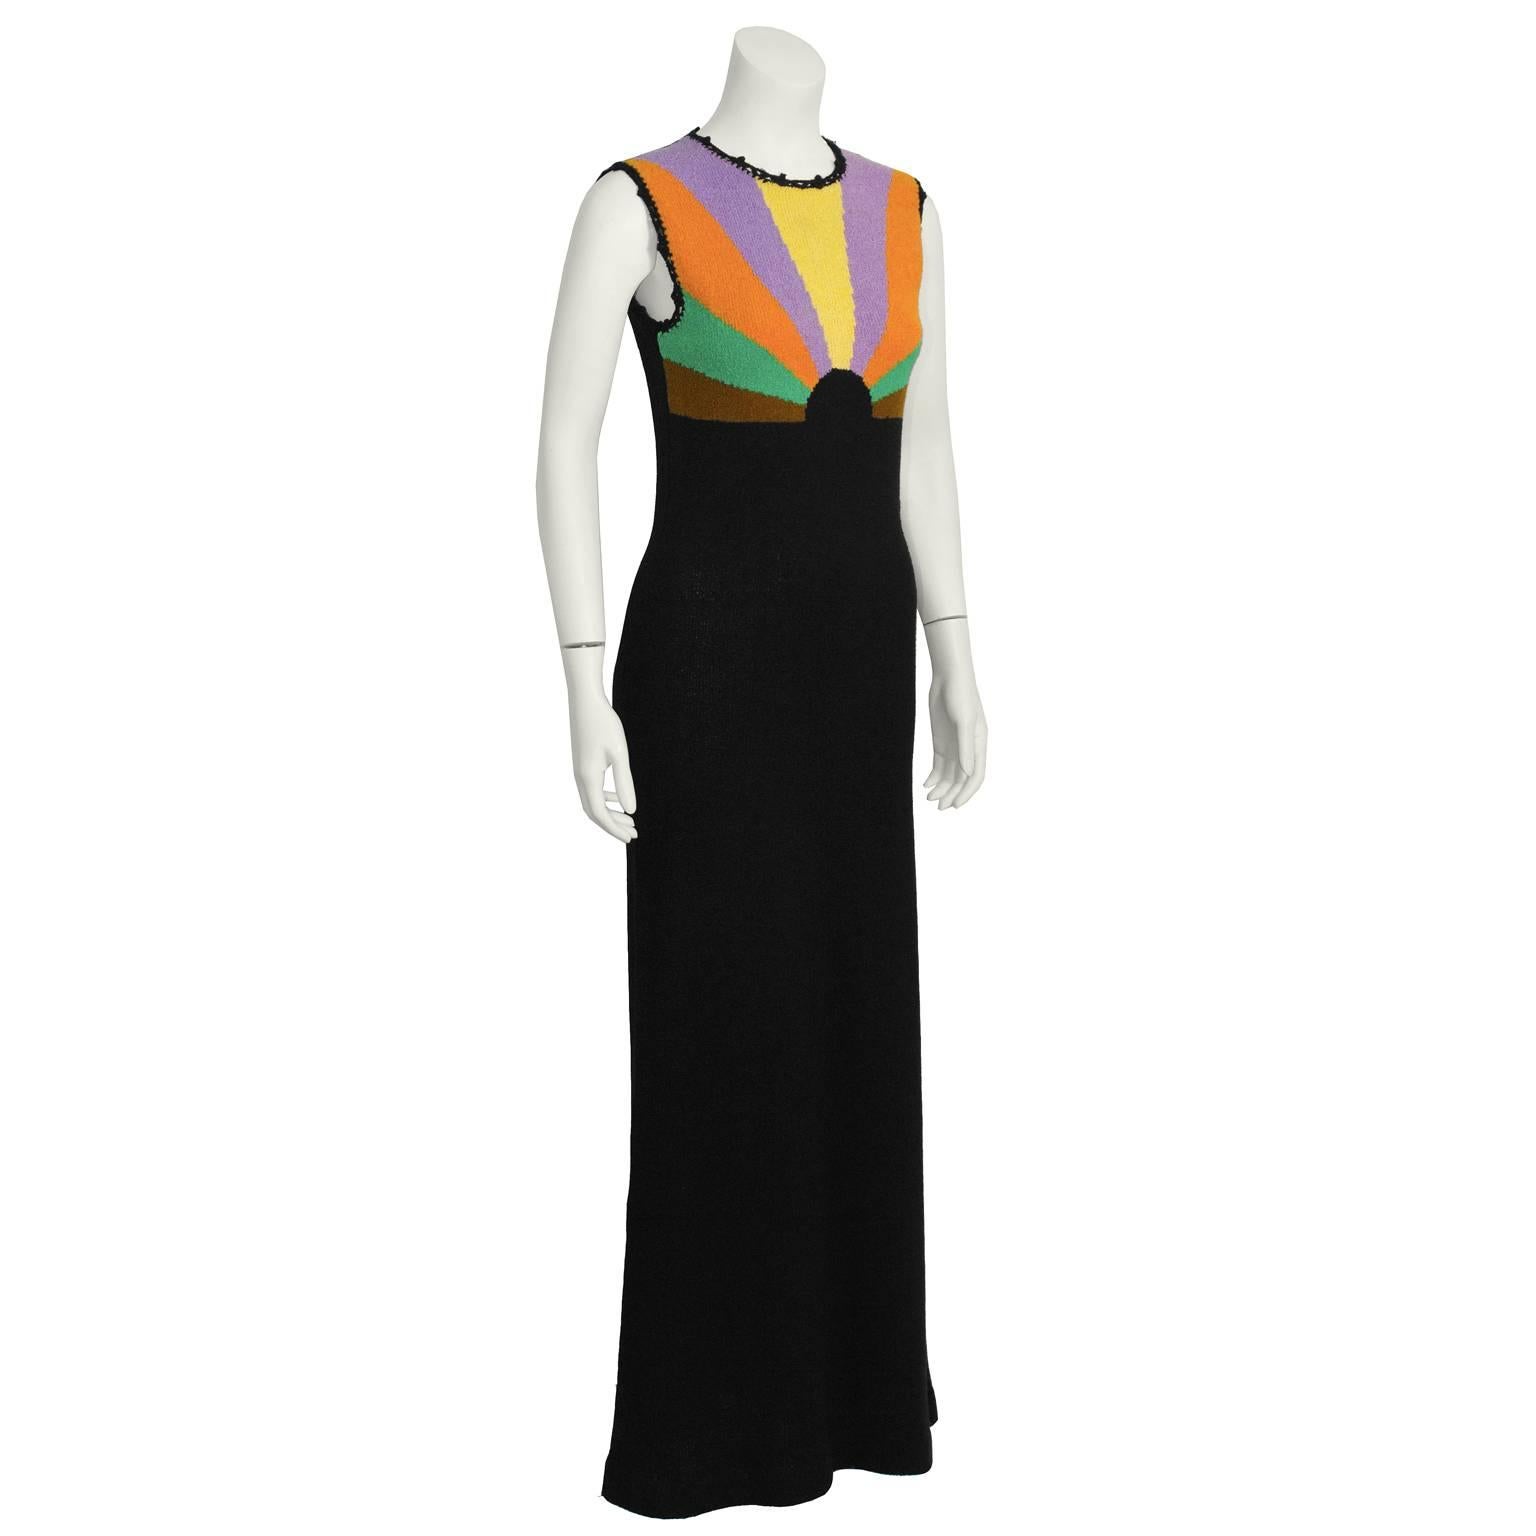 Slinky knit Puccini dress from the 1970's. Simple sheath cut, with a bright color rainbow design on bodice in yellow, purple, orange, green and brown. Back zip closure. Excellent vintage condition. Fits like a US 6. 